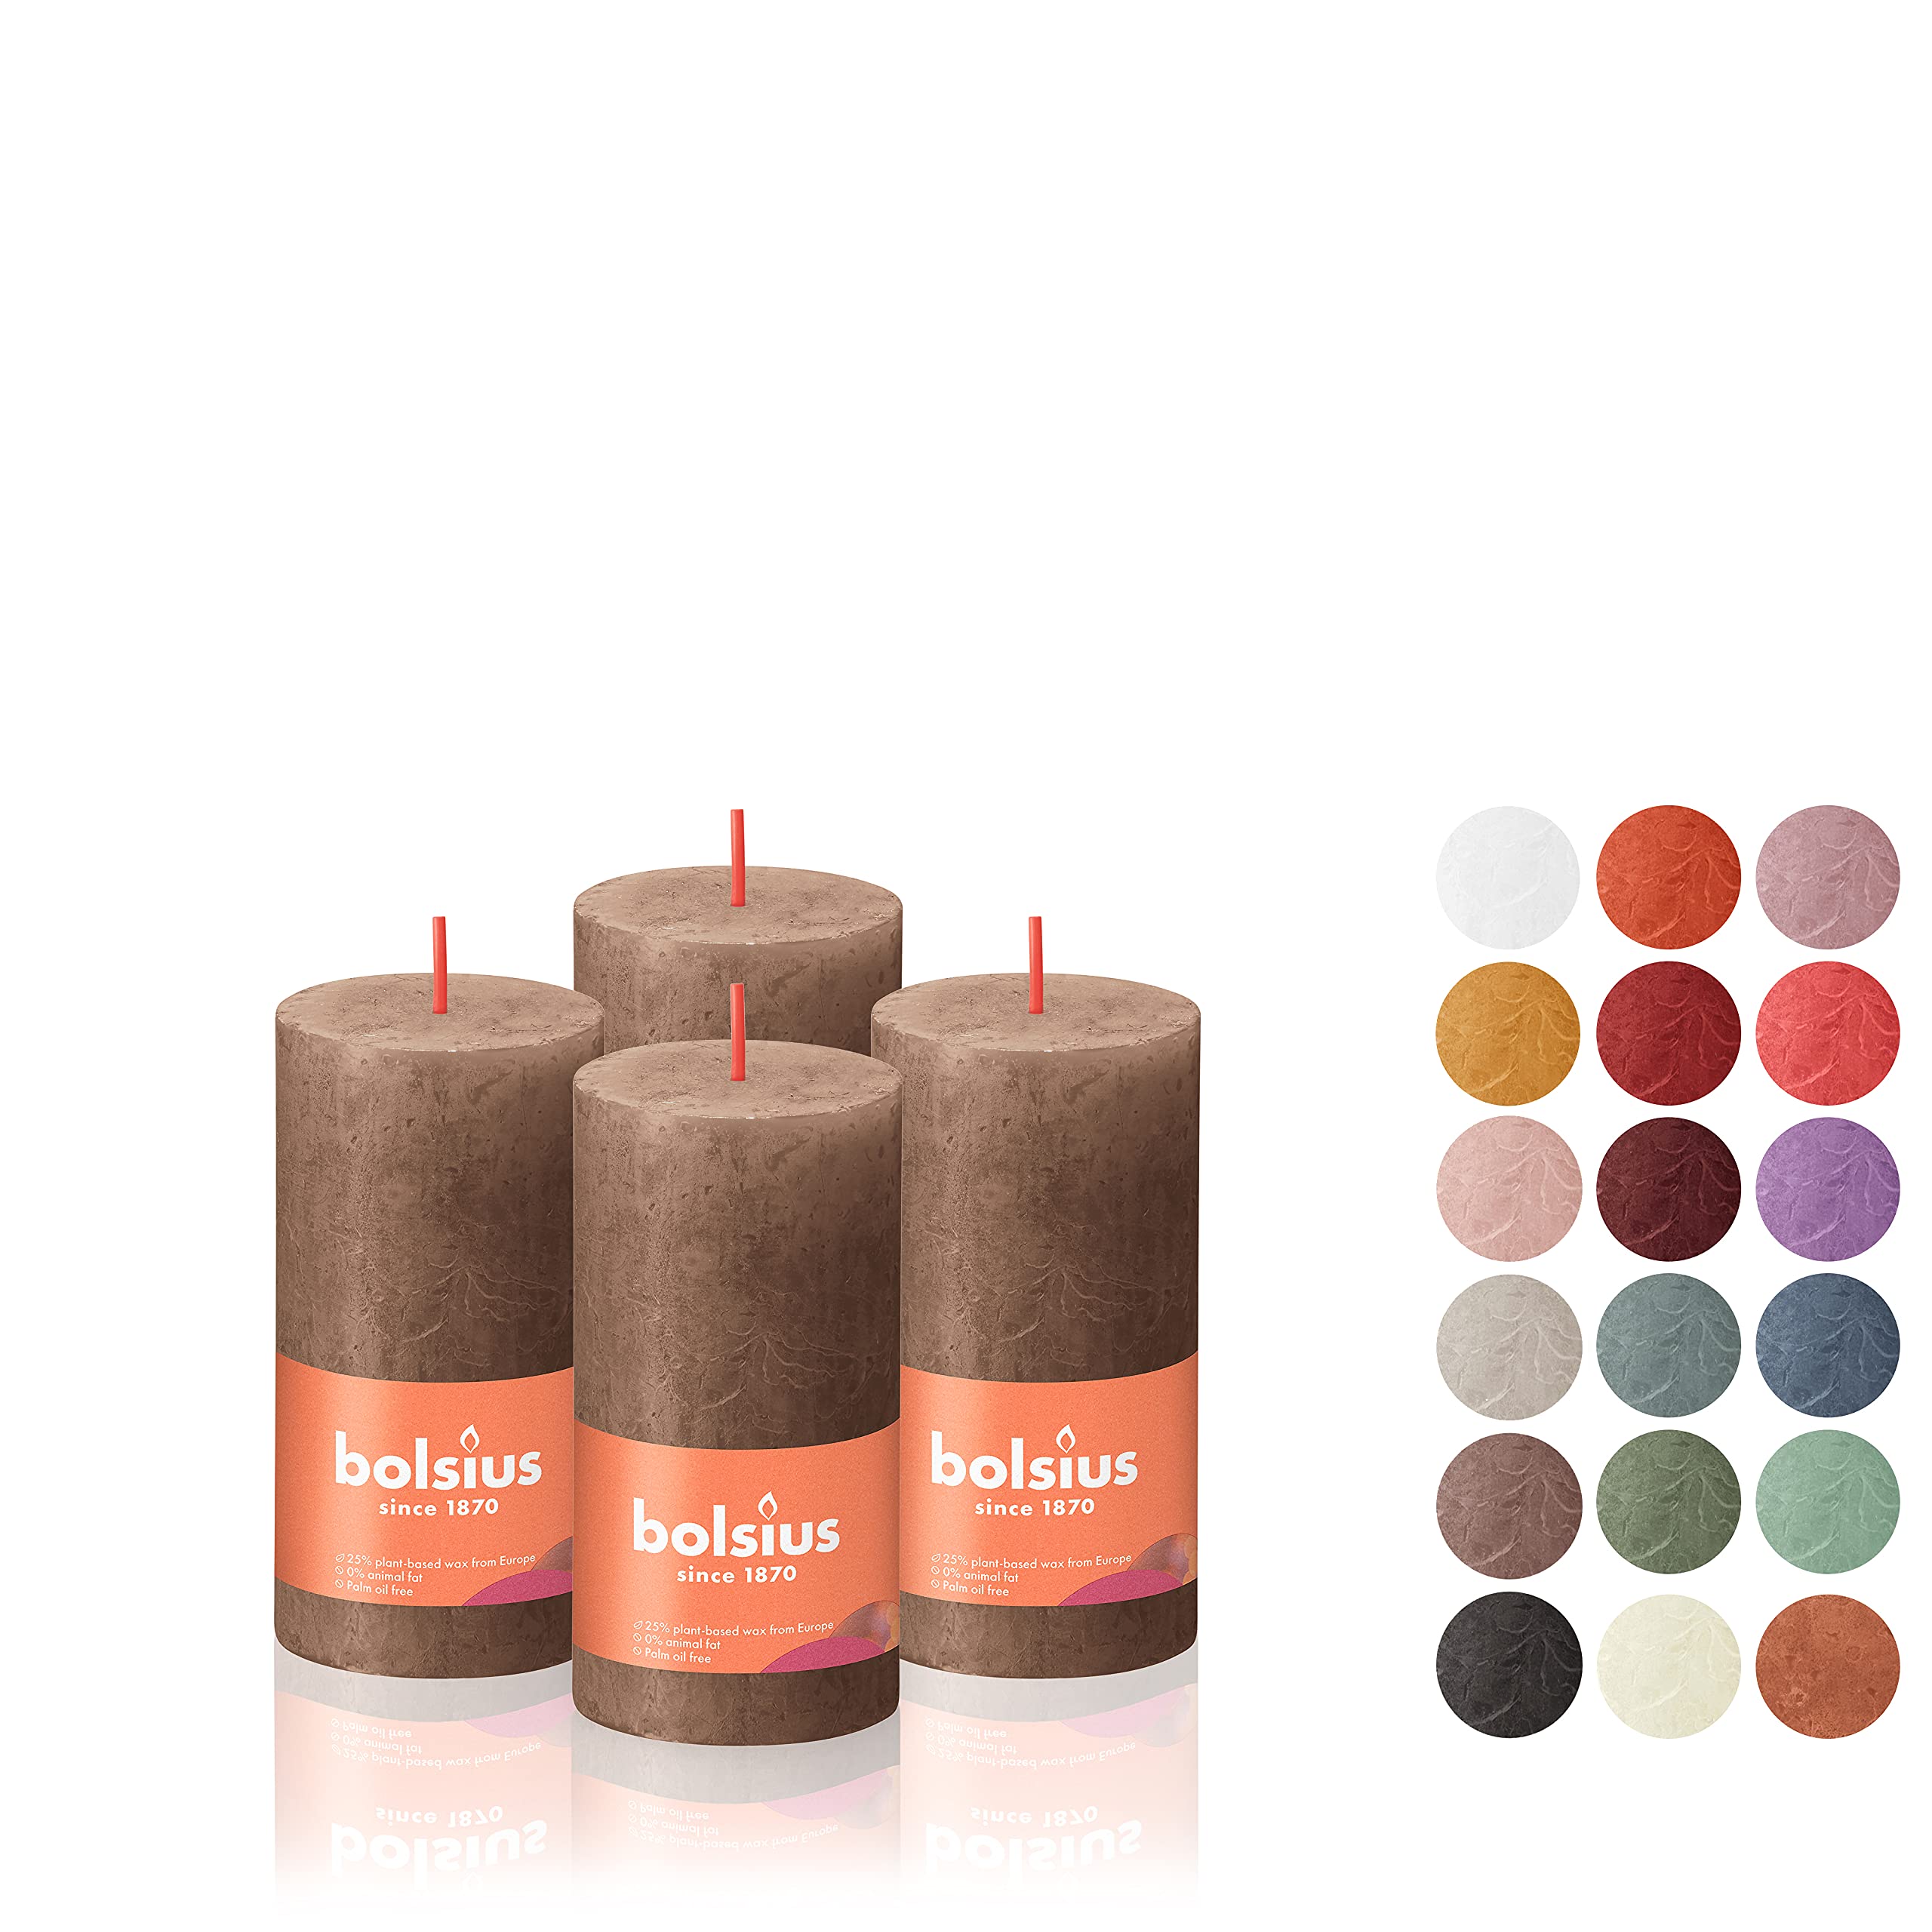 BOLSIUS 4 Pack Suede Brown Rustic Pillar Candles - 2 X 4 Inches - Premium European Quality - Includes Natural Plant-Based Wax - Unscented Dripless Smokeless 30 Hour Party D�cor and Wedding Candles  - Like New